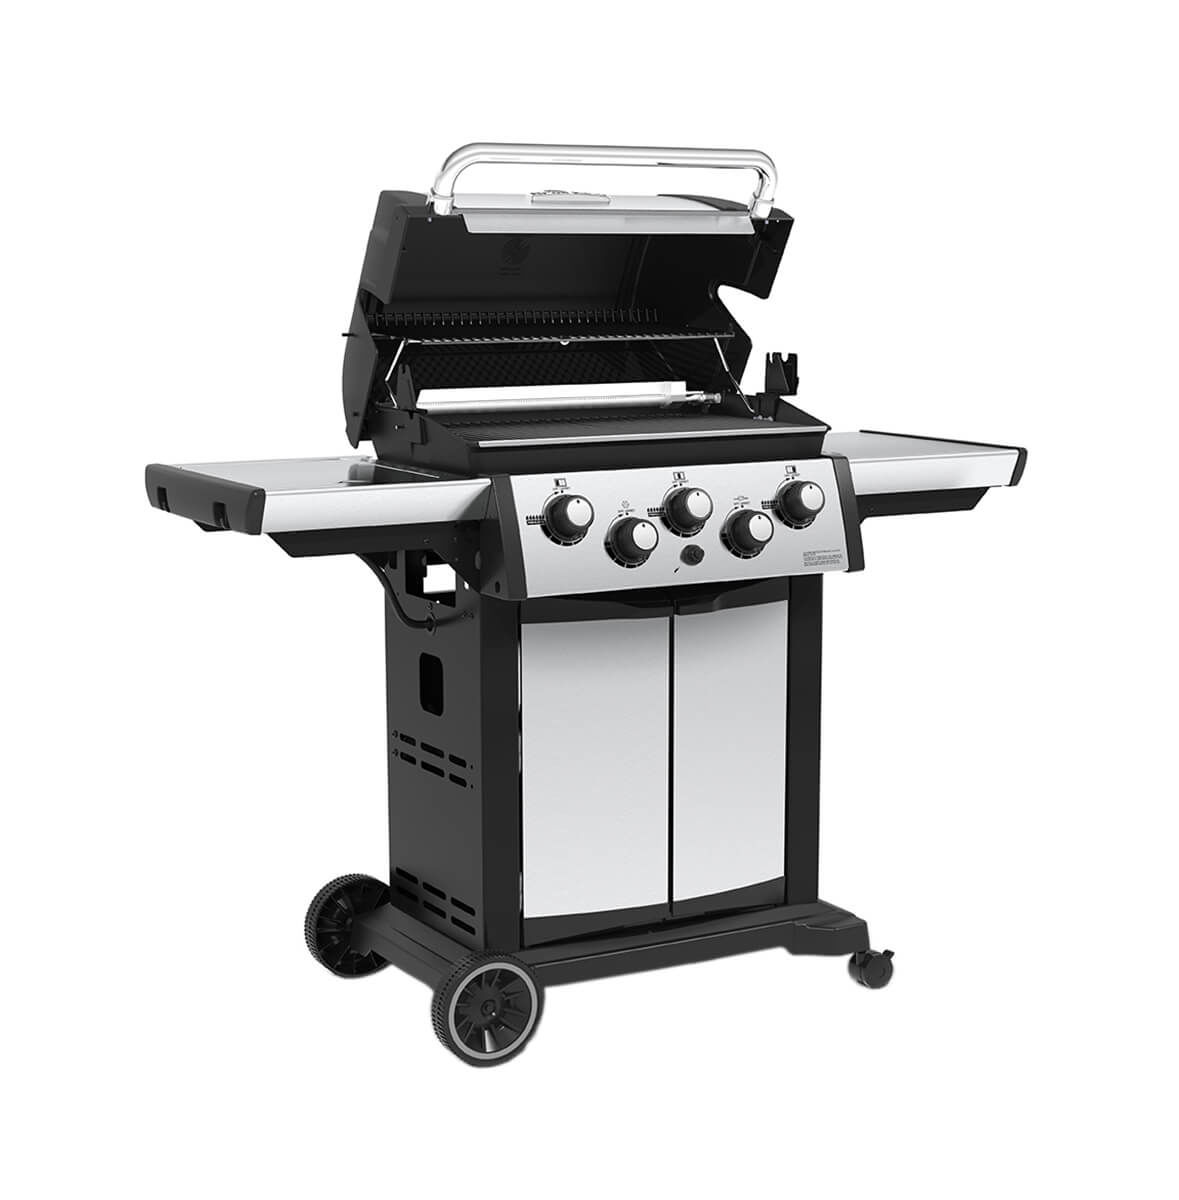 Image of Broil King Signet 390 Grill bei nettoshop.ch